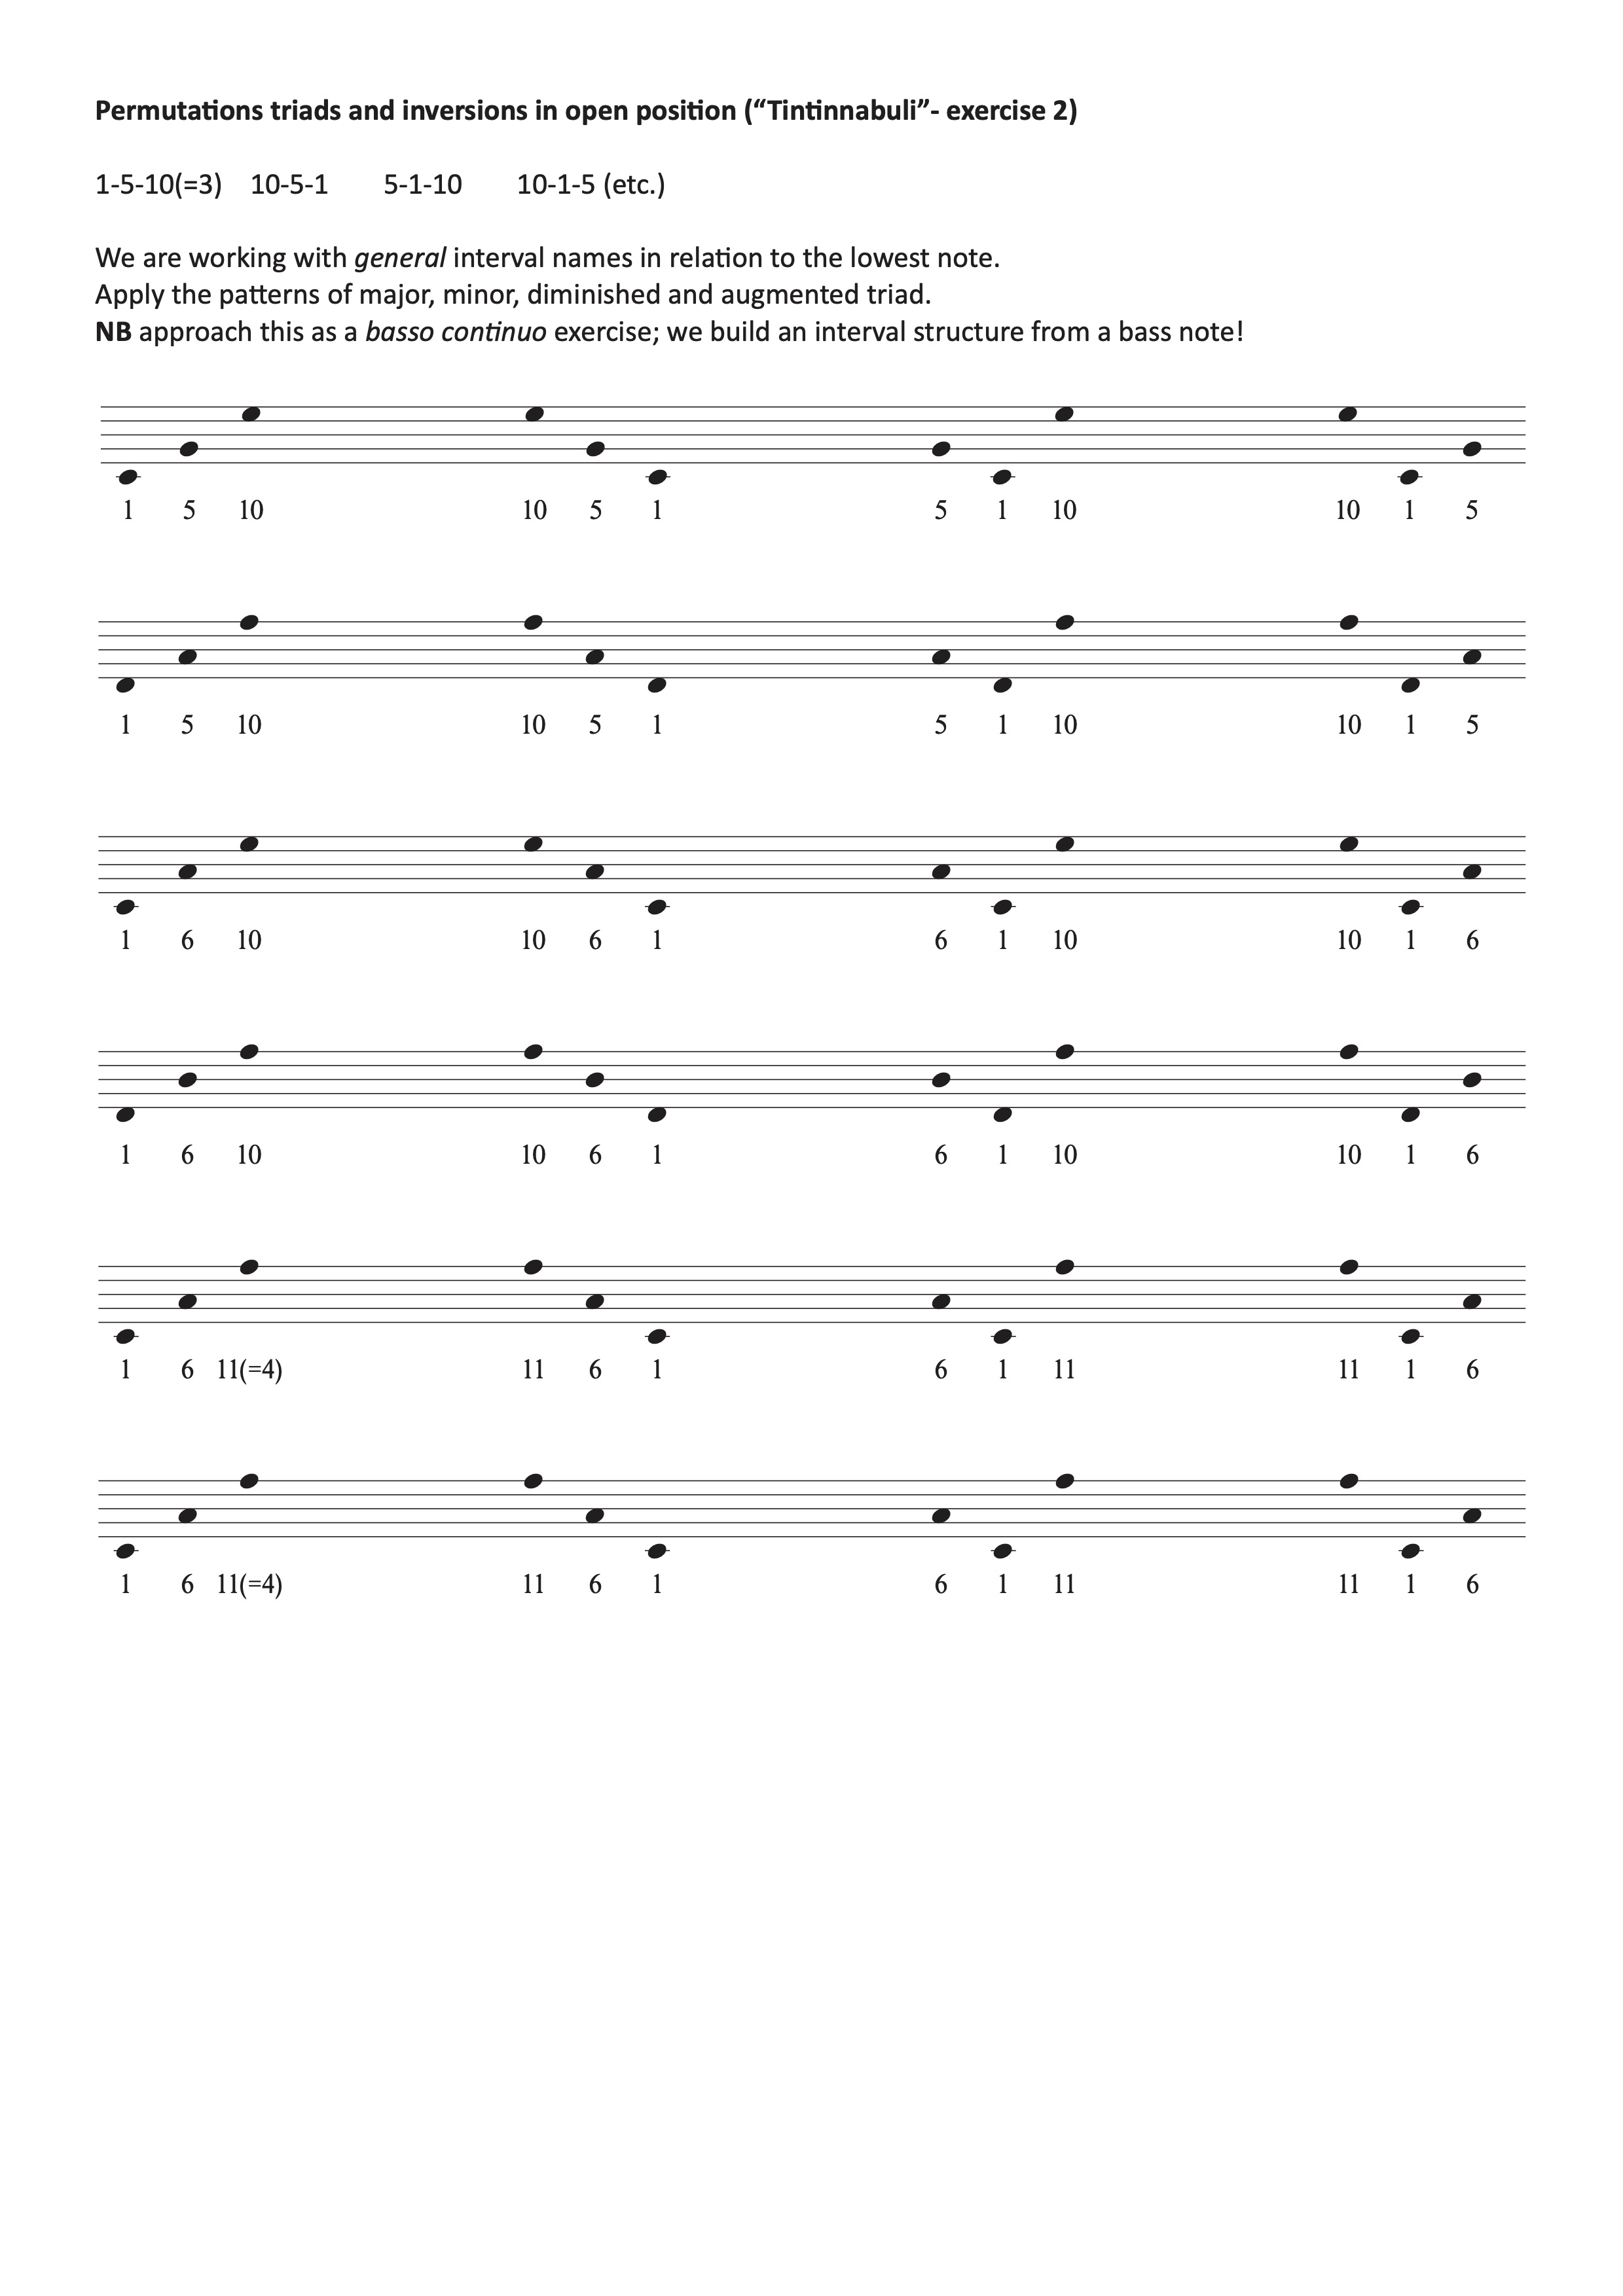 Permutations triads and inversions in open position (“Tintinabuli”- exercise 2) finale - Score.jpg